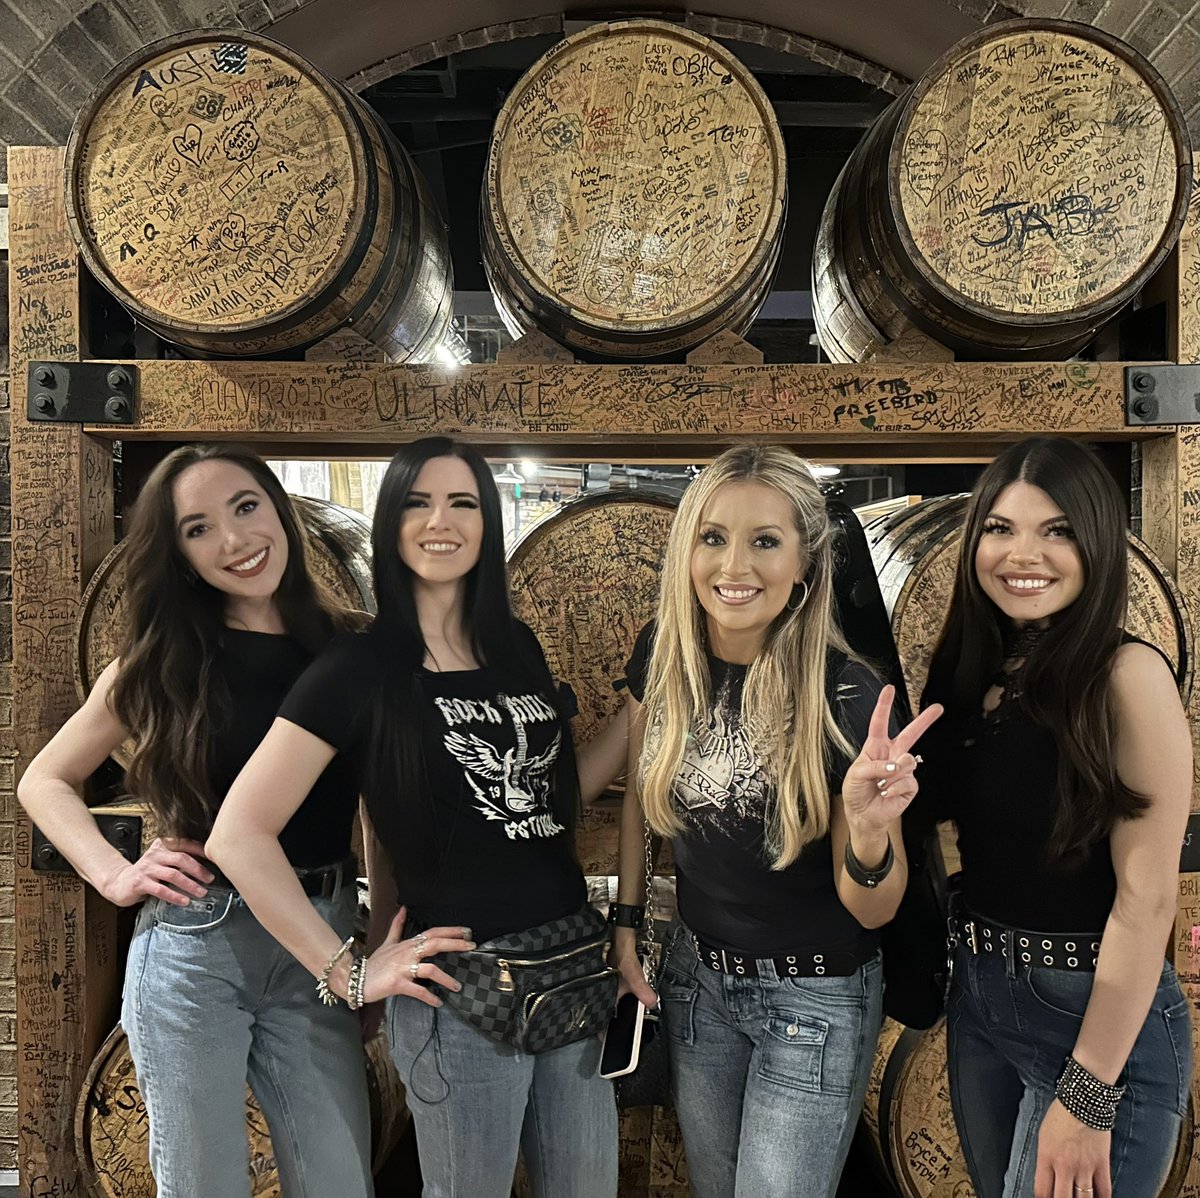 We kept the secret for a long time, but we were in Nashville because we were opening for Lynyrd Skynyrd for the private event @femmesofrock performed at!! Here we are in front of some barrels of Tennessee whiskey. 🥃